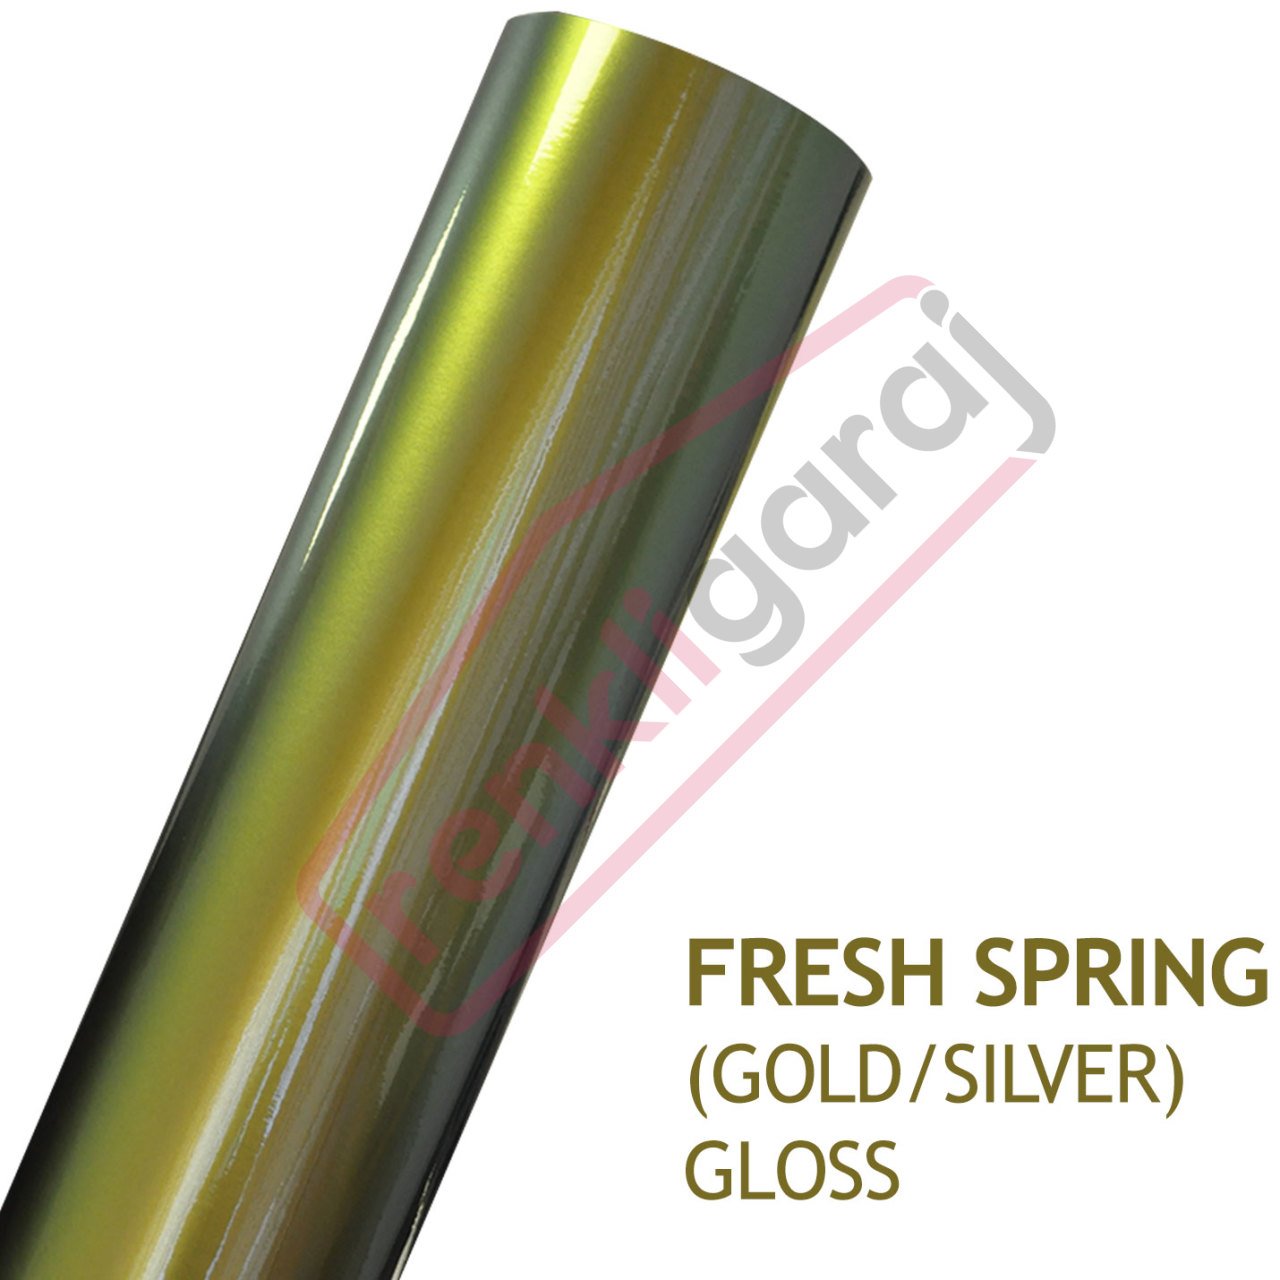 AVERY COLORFLOW GLOSS FRESH SPRING (GOLD/SILVER)